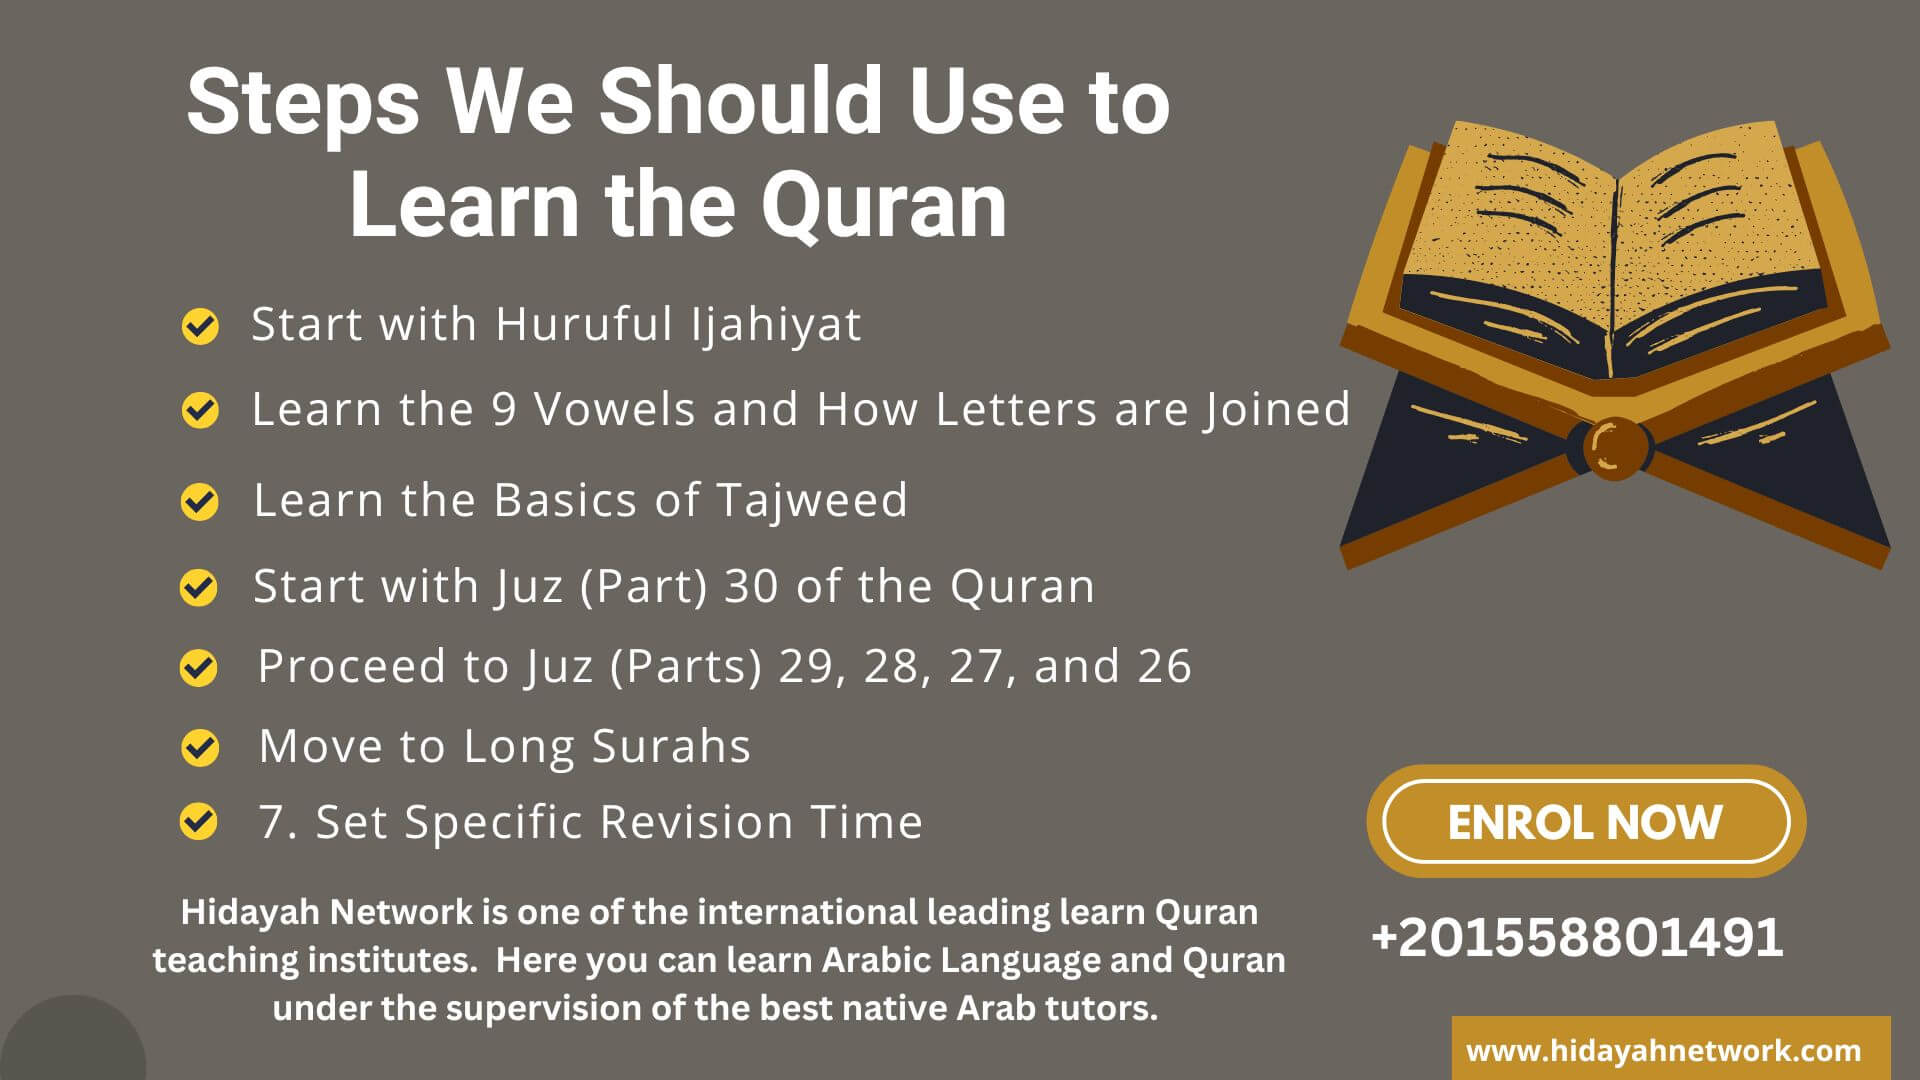 Steps We Should Use to Learn the Quran